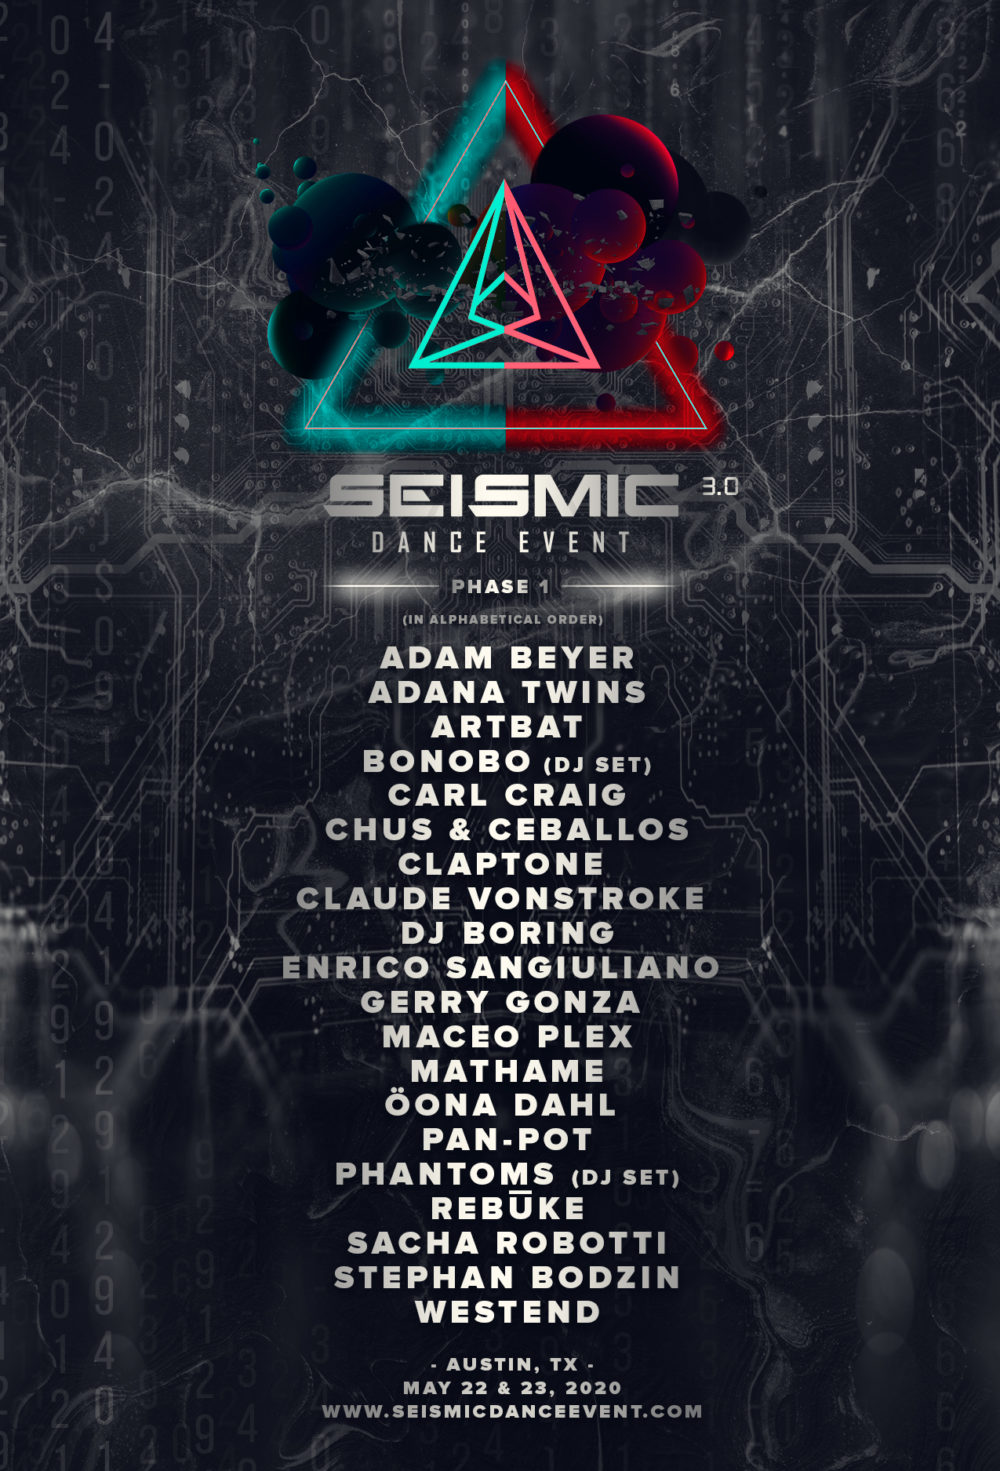 Seismic 3.0 Phase 1 lineup drop! Seismic Dance Event